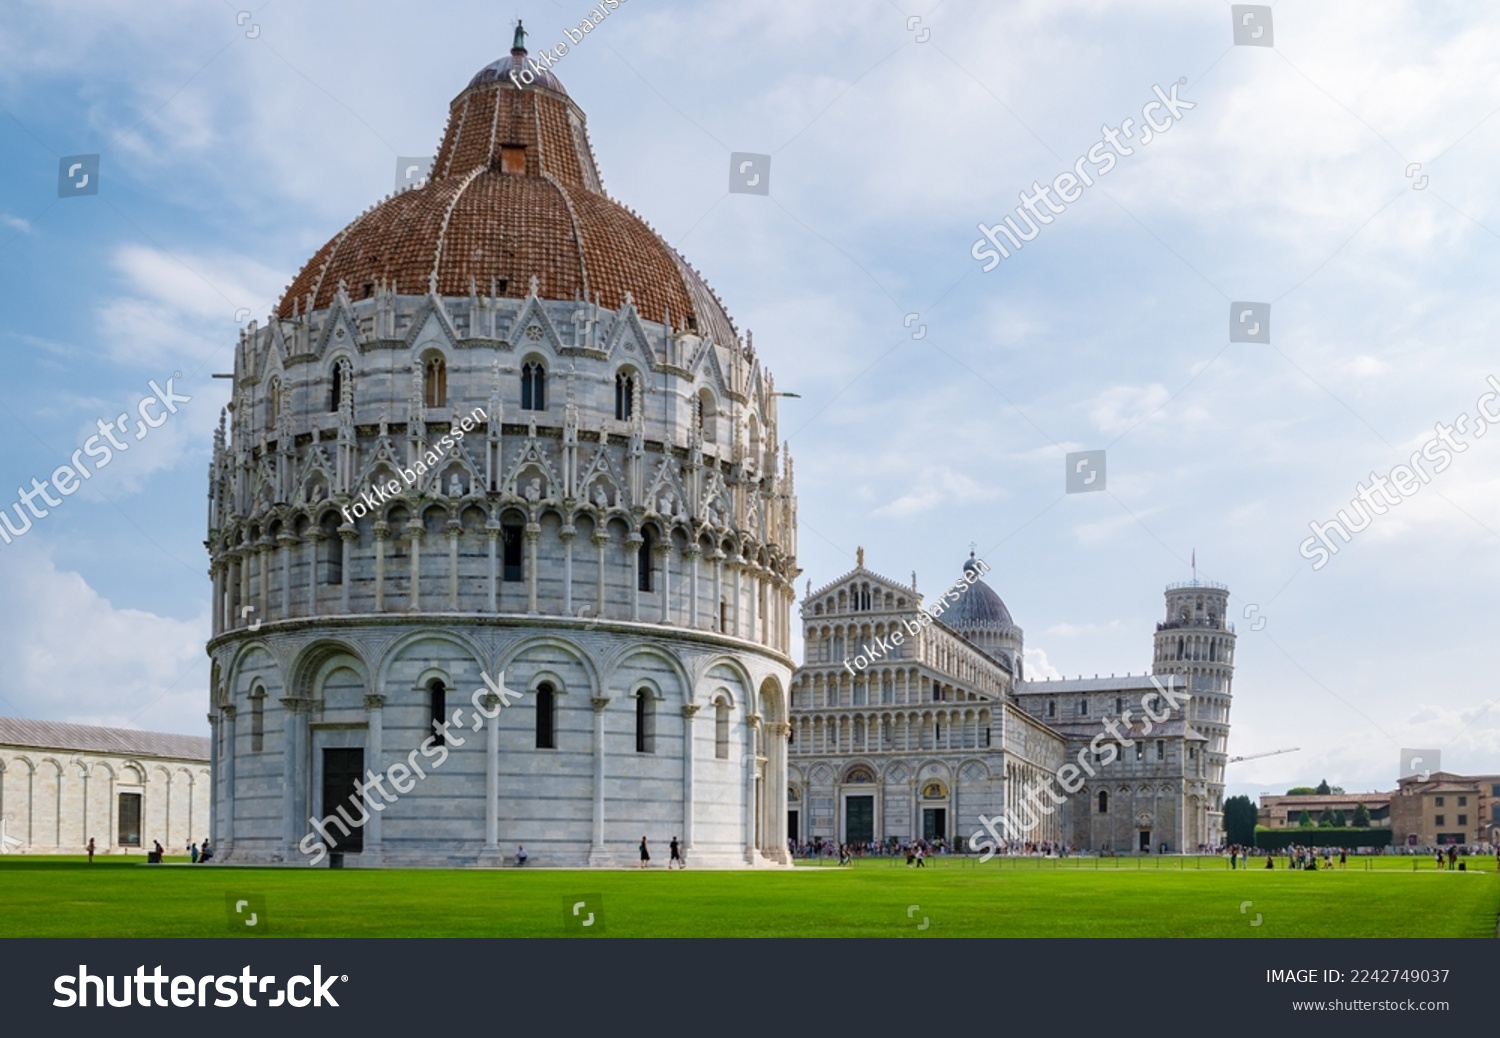 Leaning tower of Pisa Italy with Basilica Cathedral on a bright summer day with green grass low angle.  #2242749037